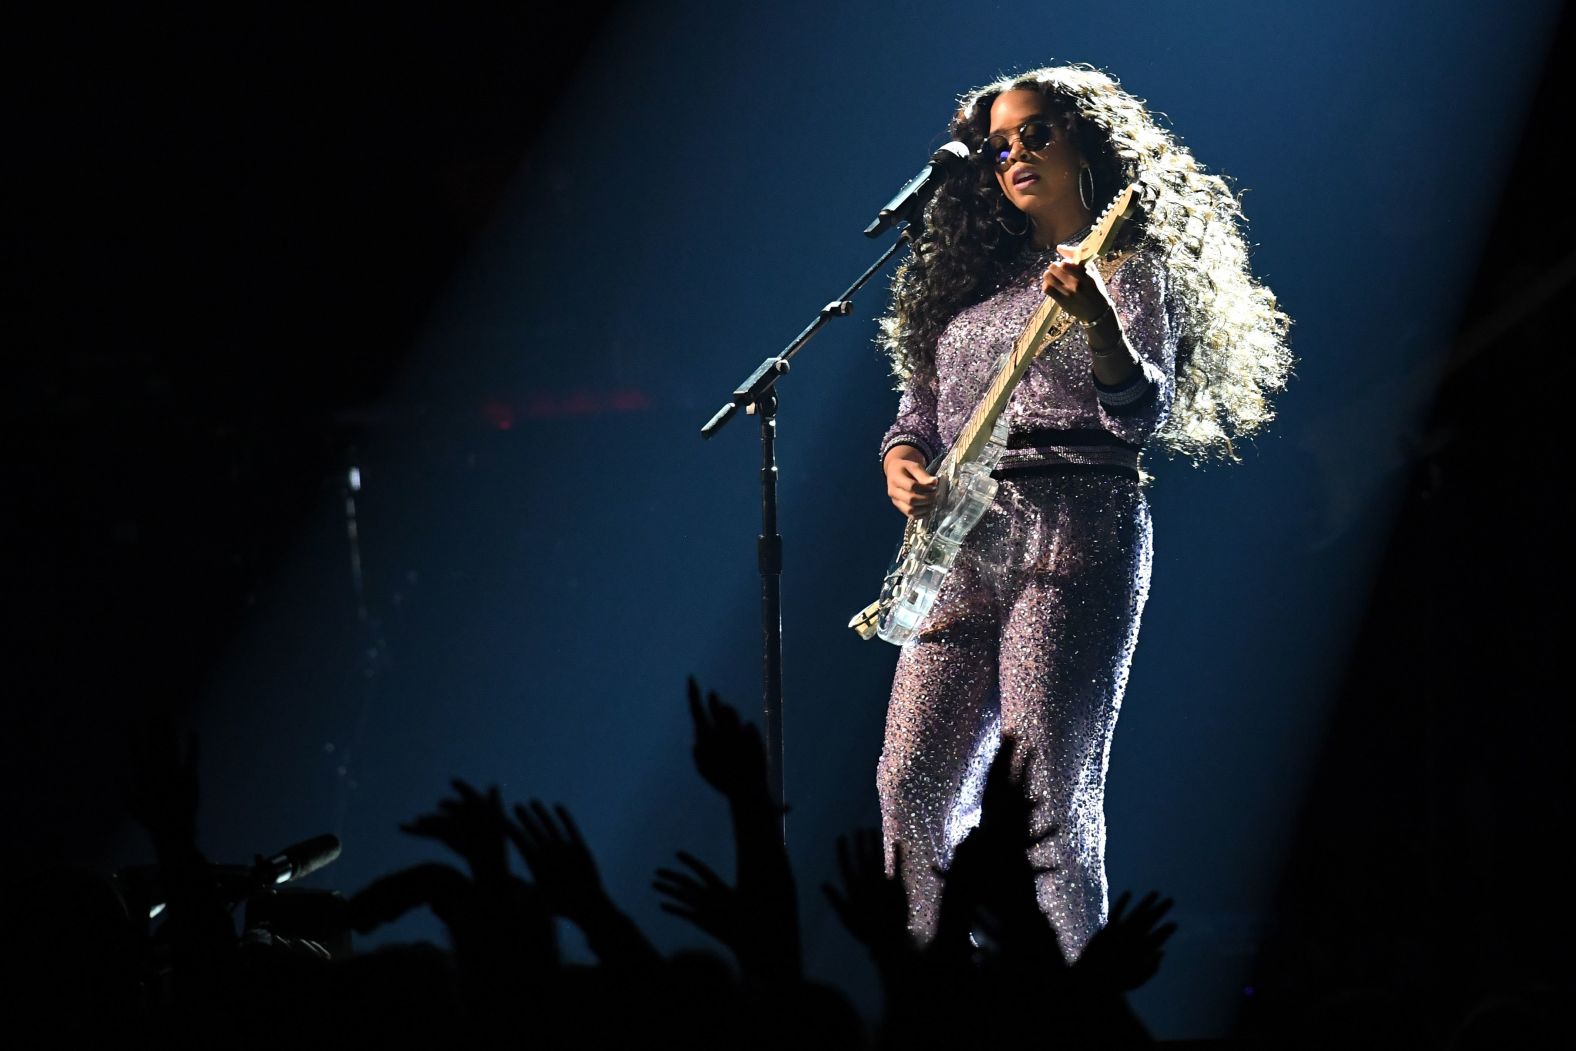 H.E.R. jams out to her single "Hard Place."